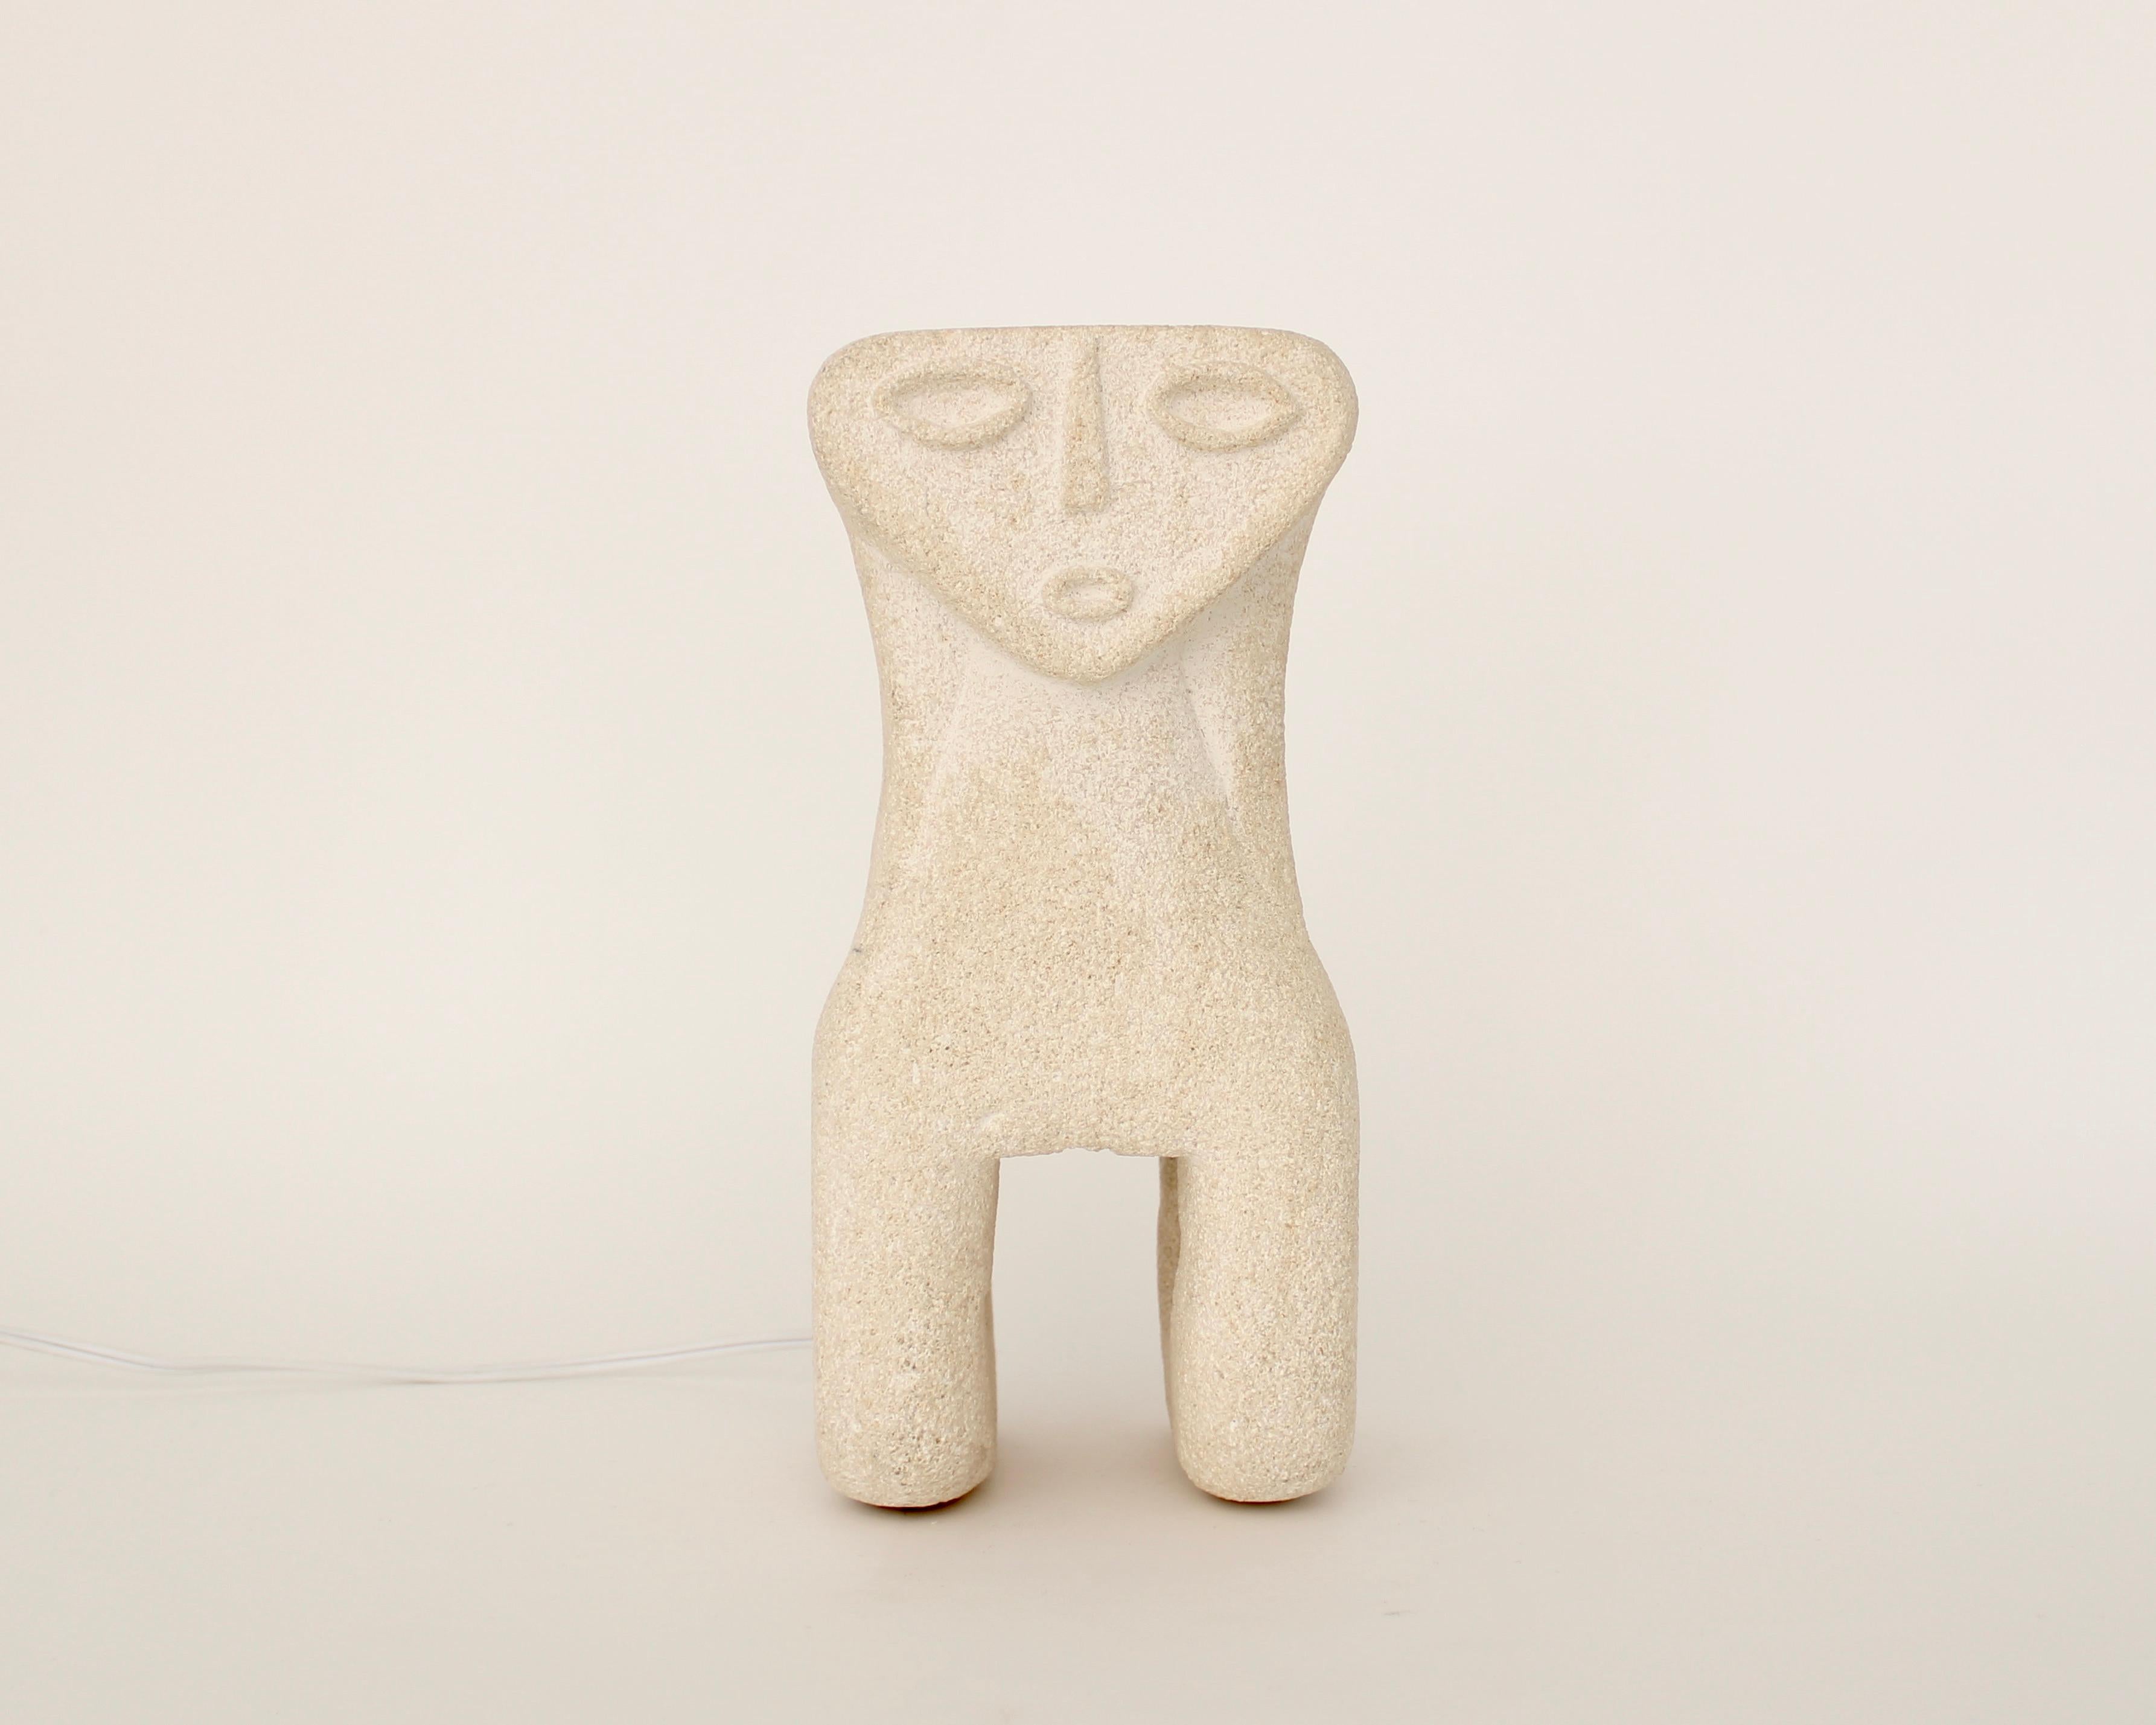 Hand carved French volcanic Luberon limestone or tuff stone lamp with a Minimalist beton-brut architectural bearing a figurative face reminiscent of archaic faces.
By Vallauris artist Albert Tormos, made circa 1970s.
Tormos also worked in St